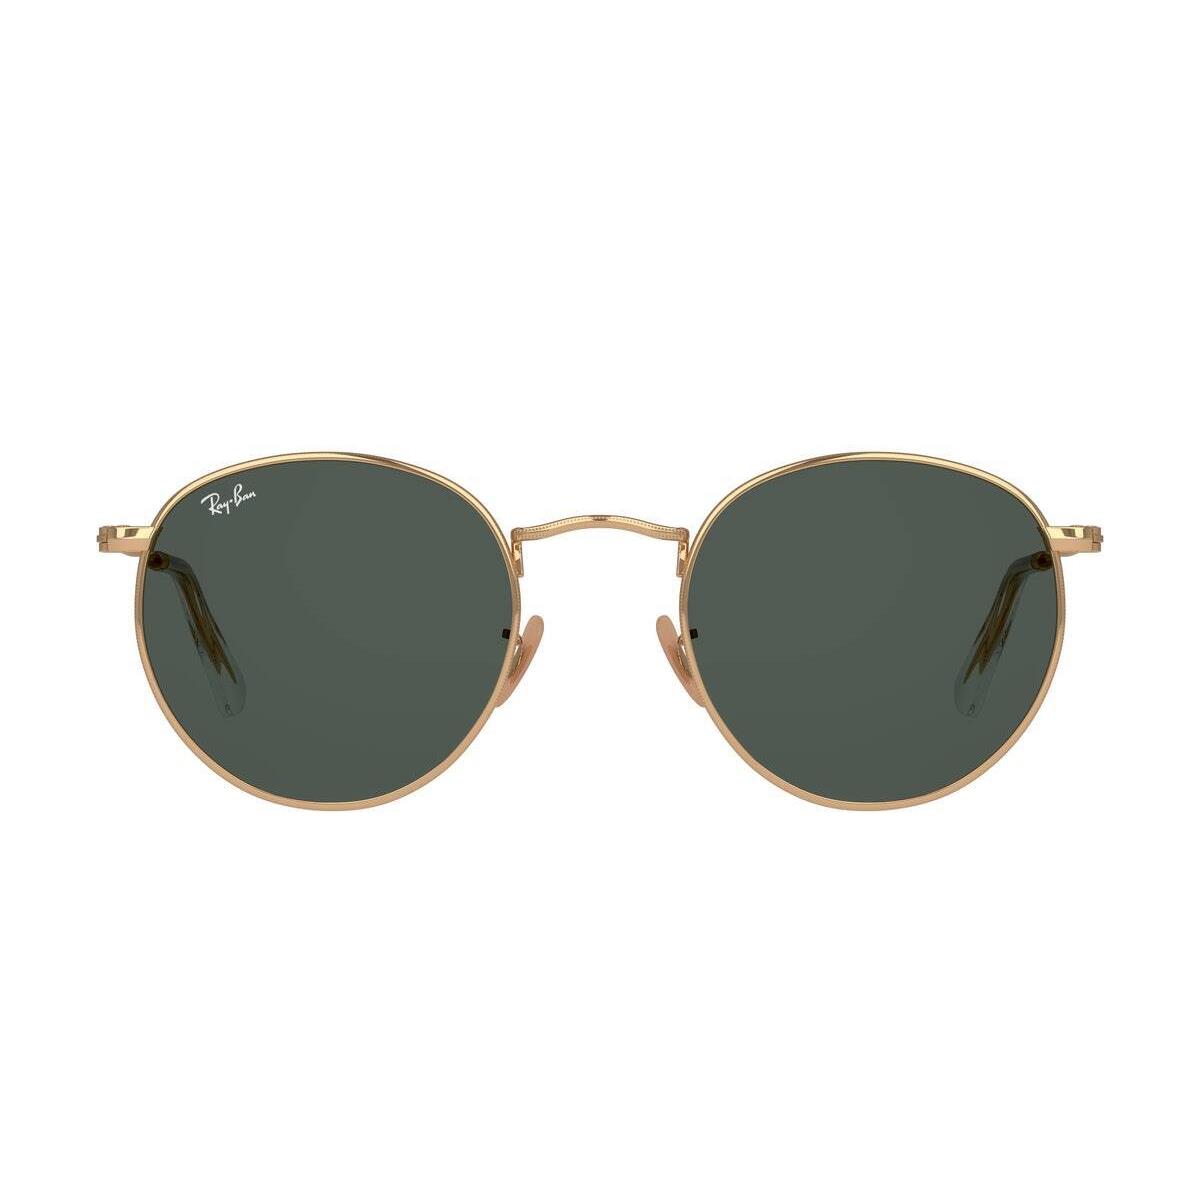 Ray-ban Round Metal Polished Gold/green G-15 47 mm Sunglasses RB3447 001 47 - Frame: Gold, Lens: Green